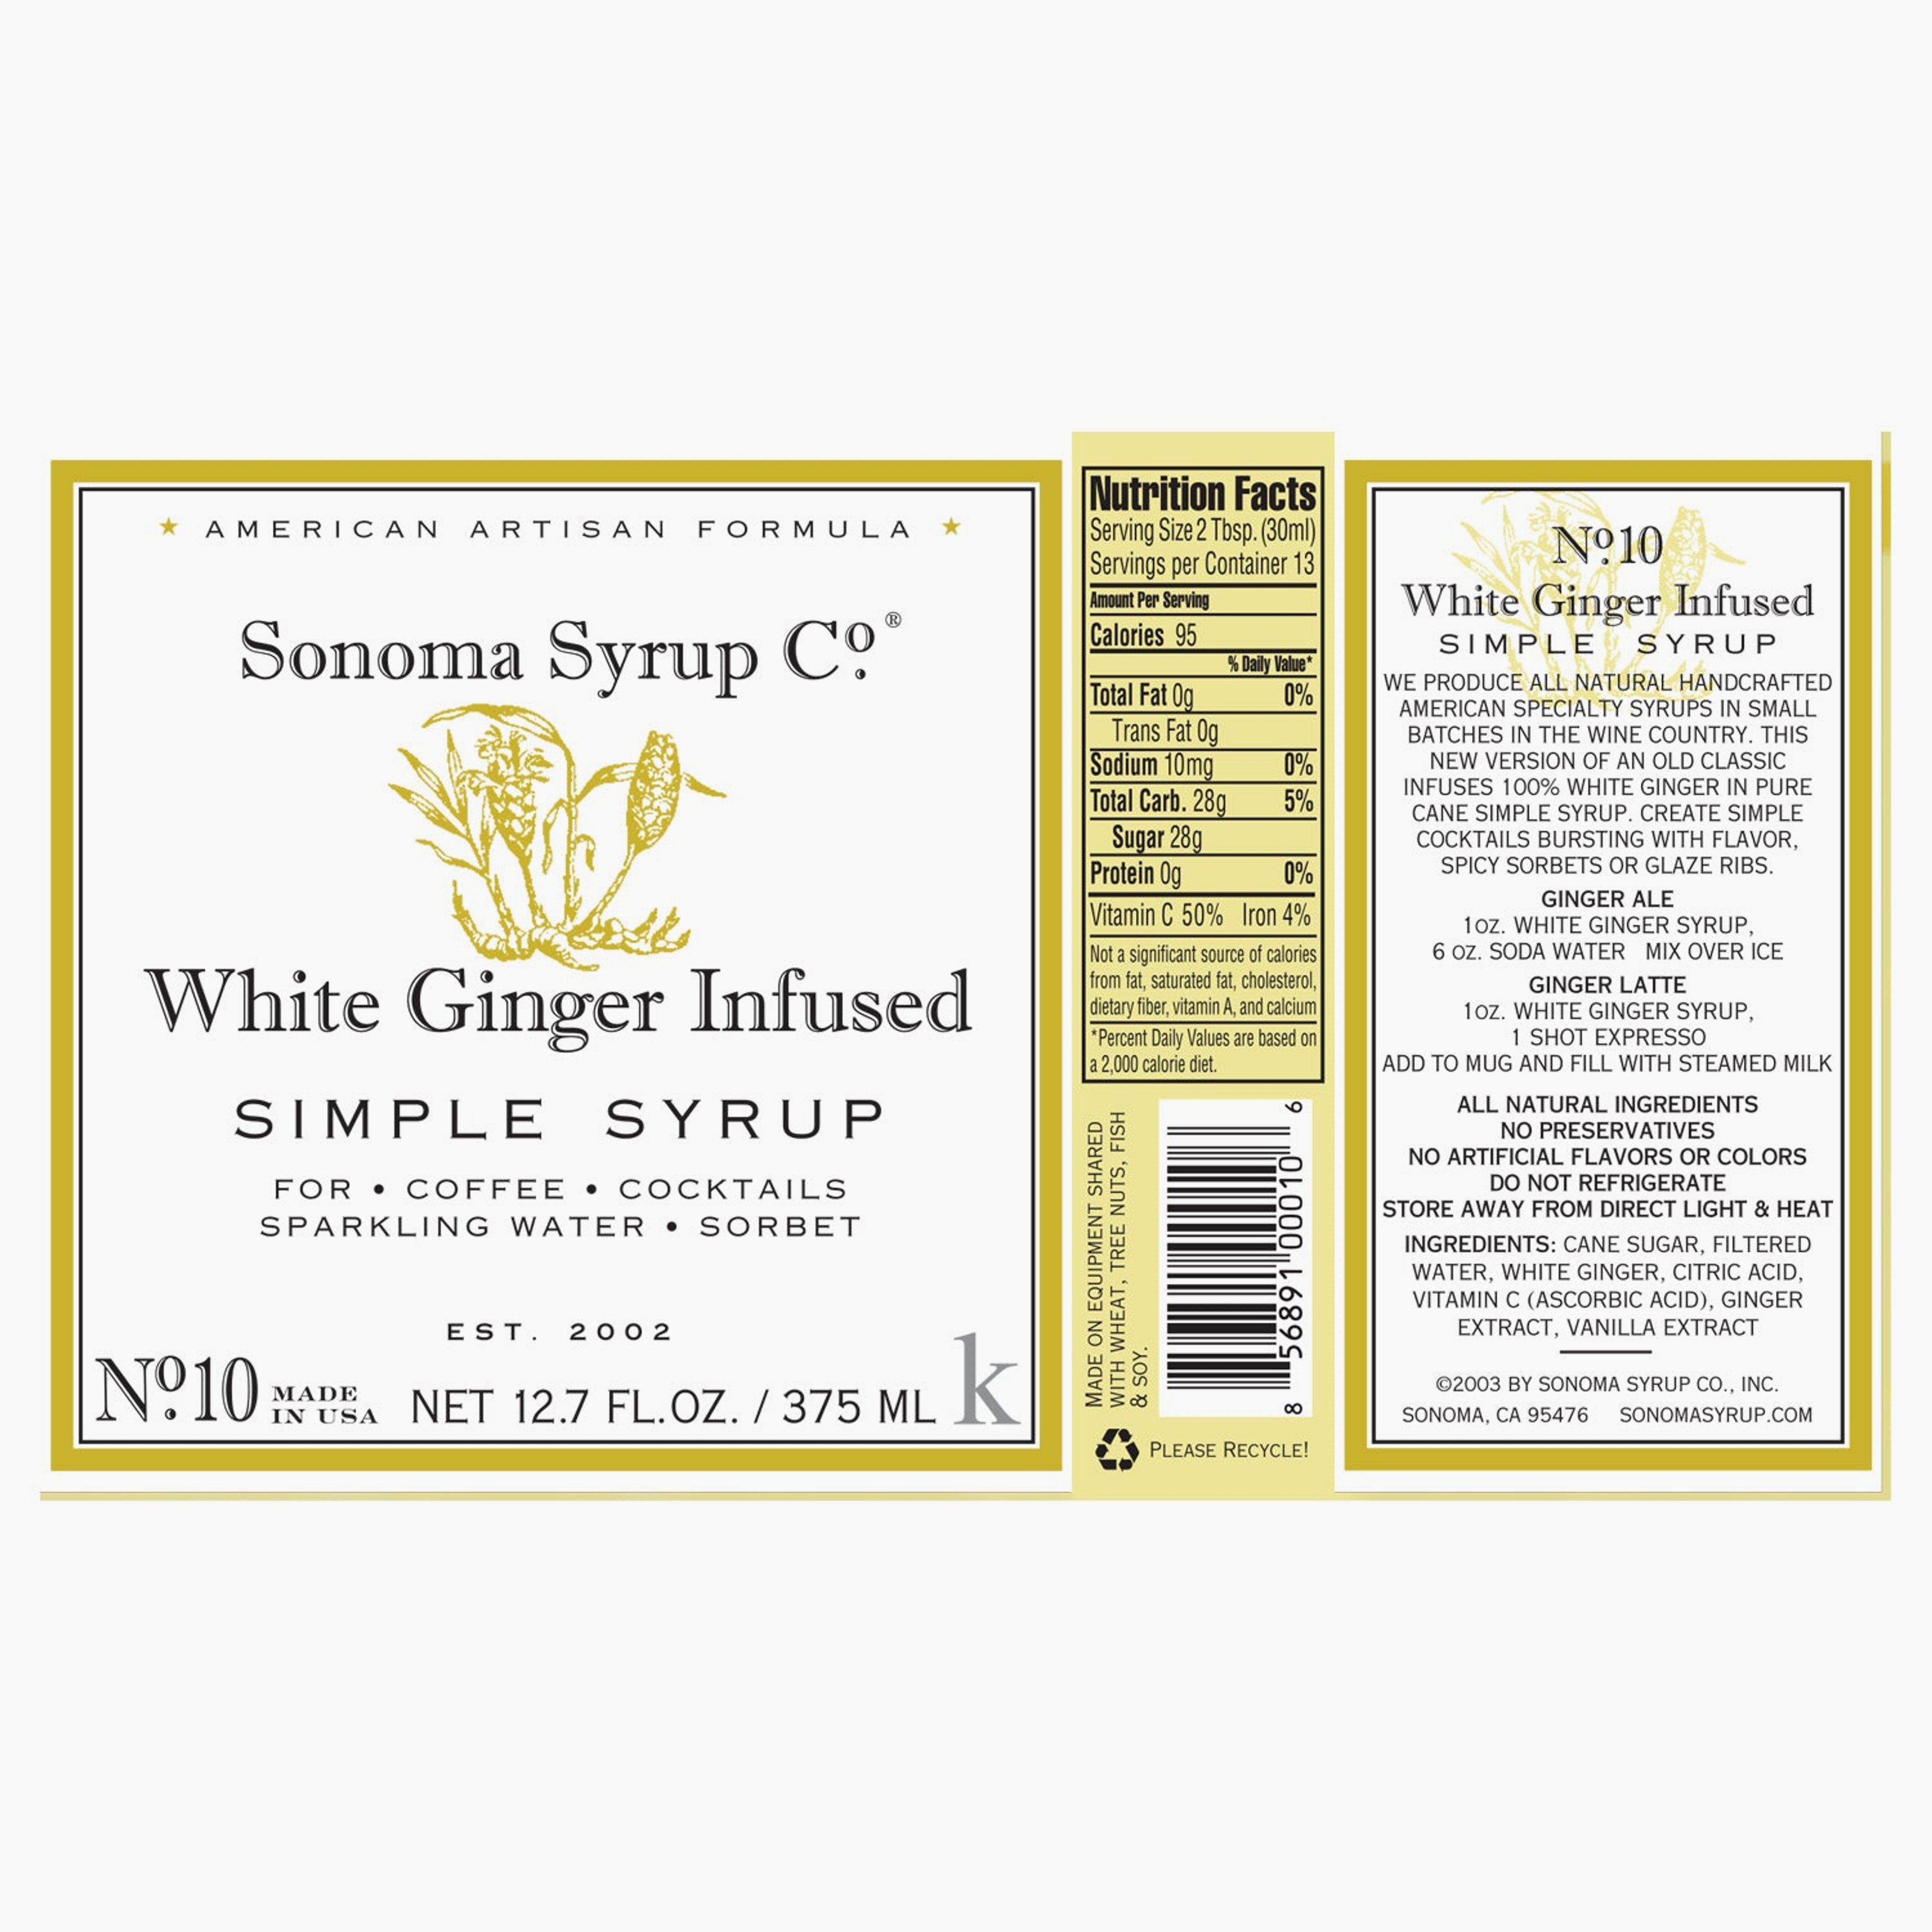 No. 10 White Ginger Infused Simple Syrup